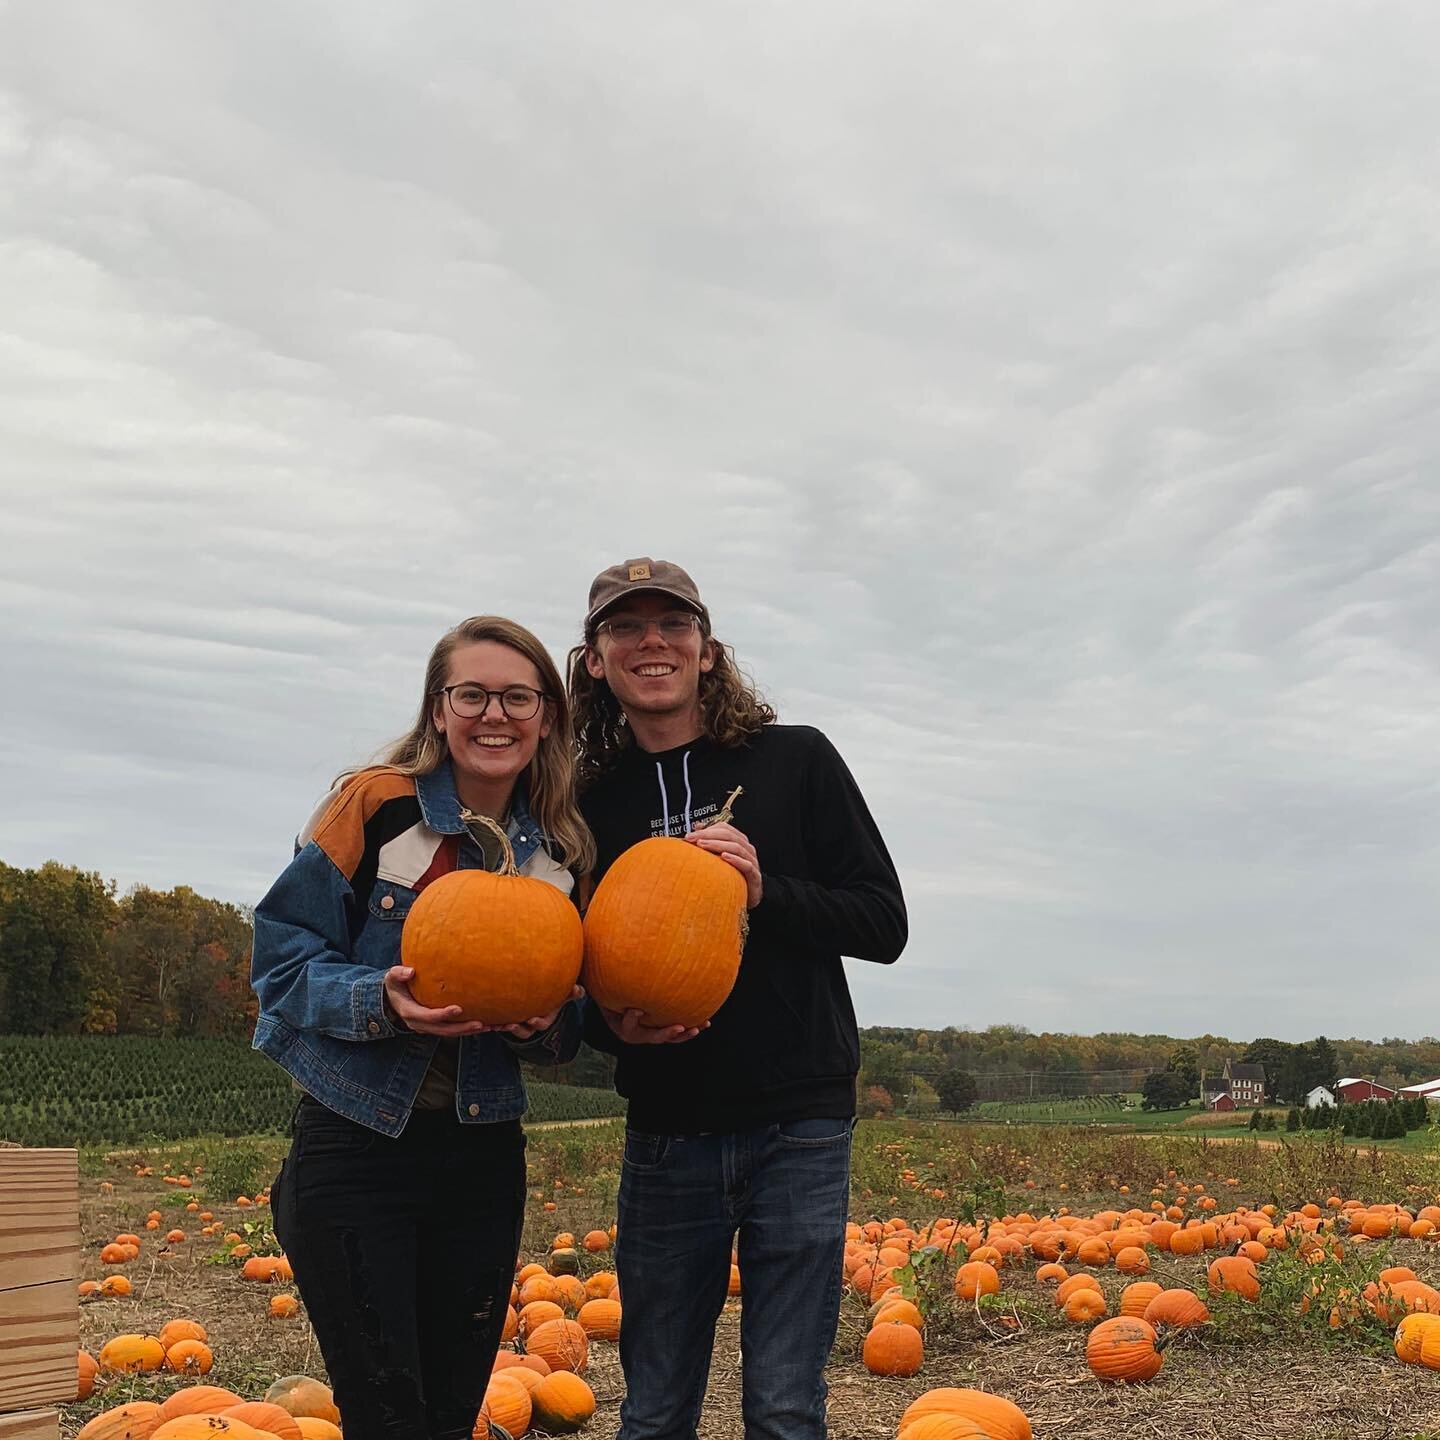 If you know me, you know that while picking pumpkins I was mainly eyeing the Christmas trees. Also, @elizastottlemyer is stunning in every way